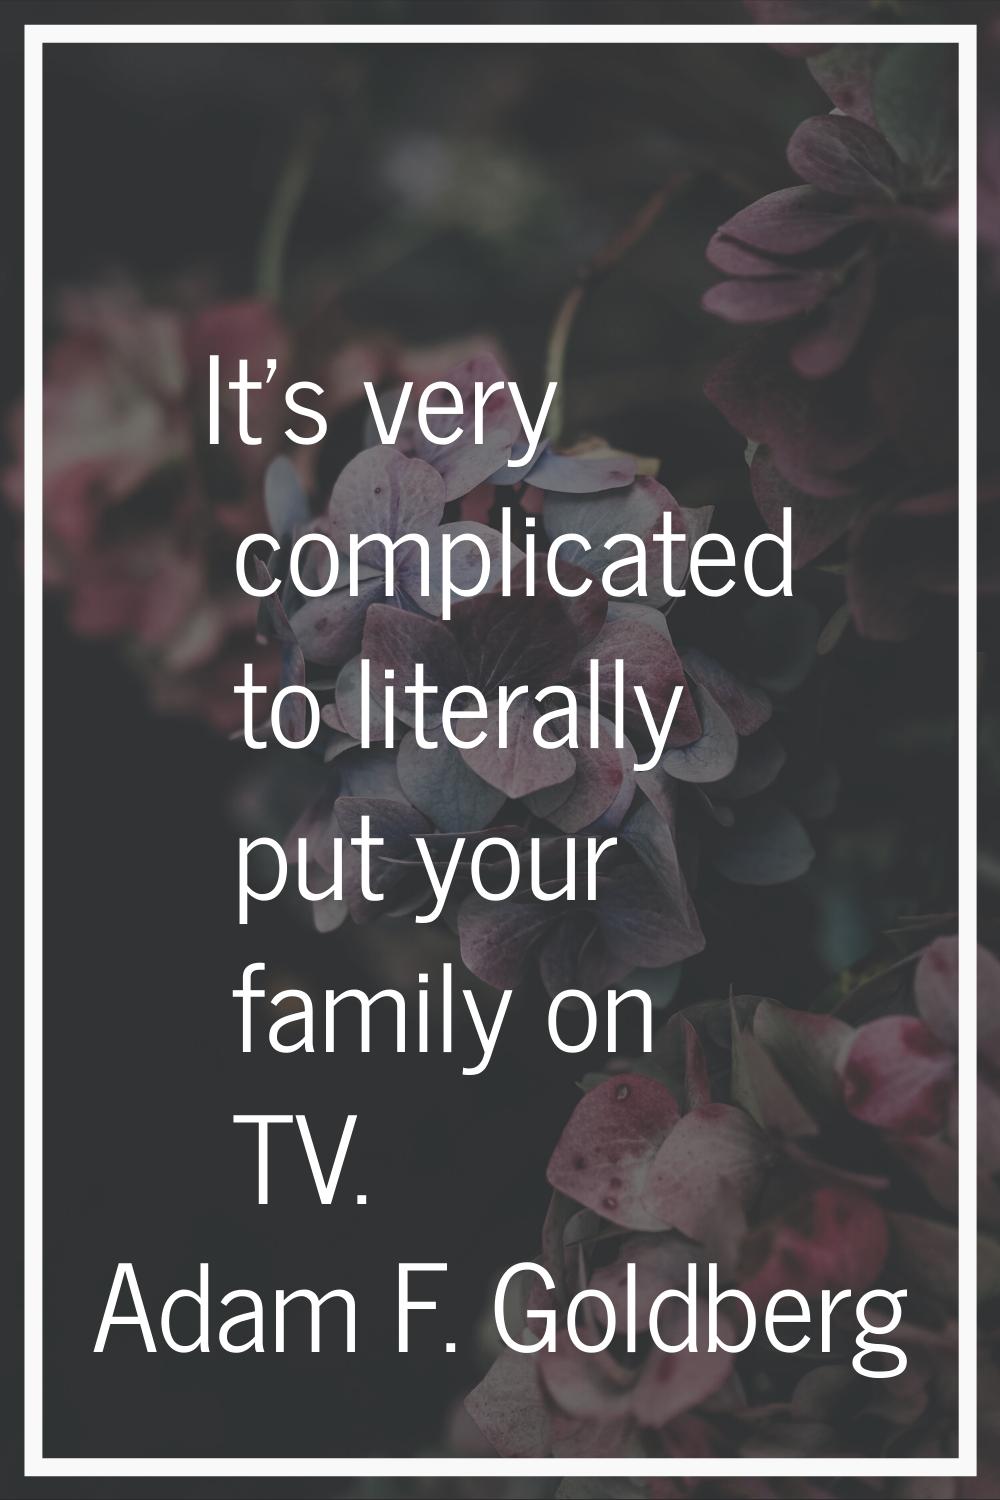 It's very complicated to literally put your family on TV.